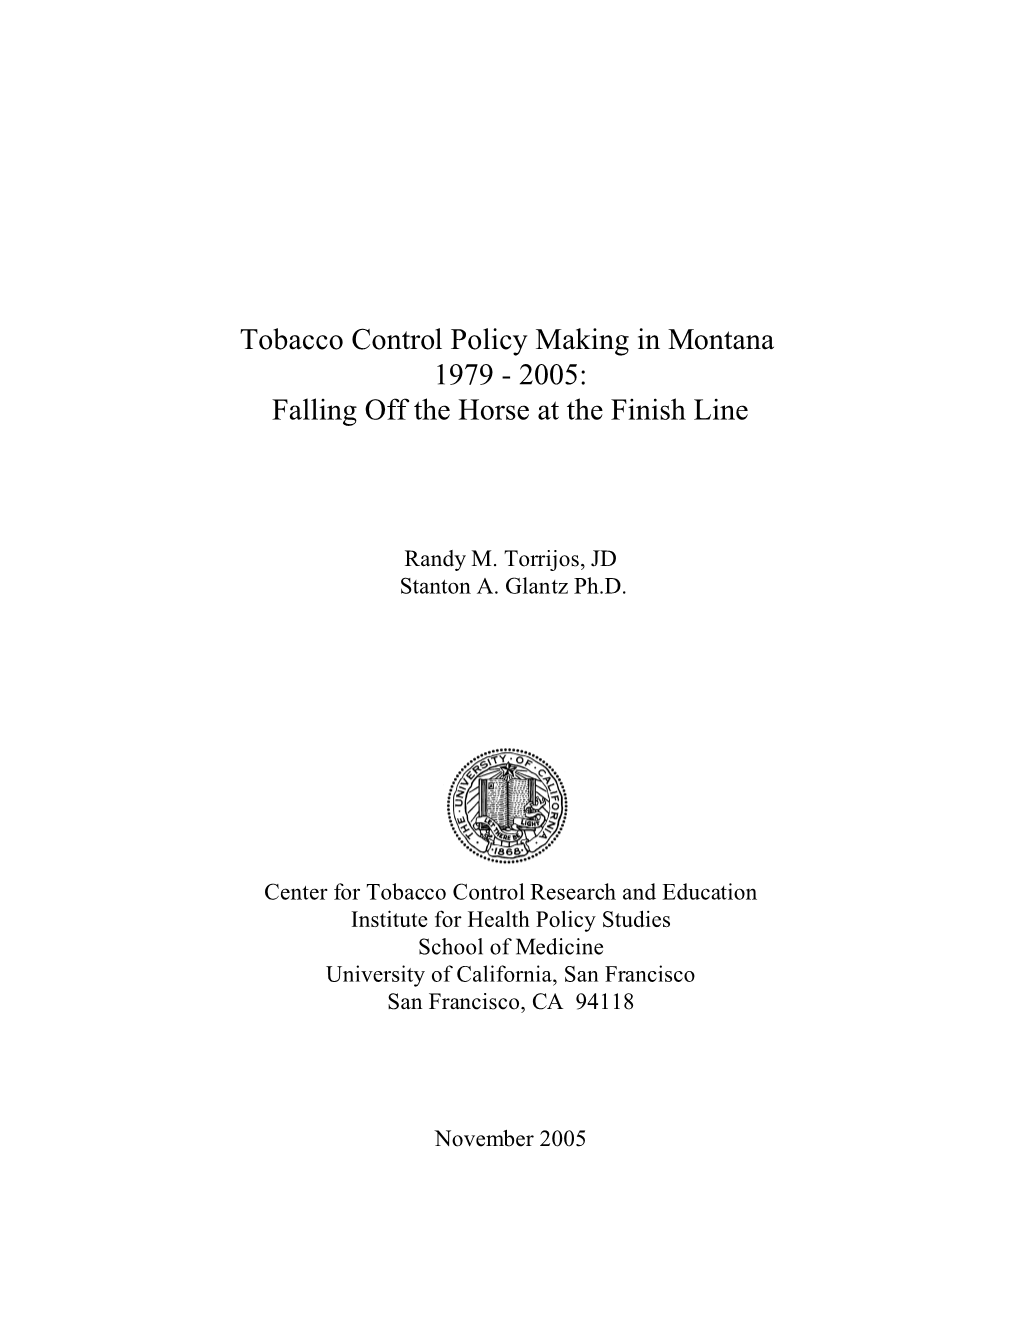 Tobacco Control Policy Making in Montana 1979-2005